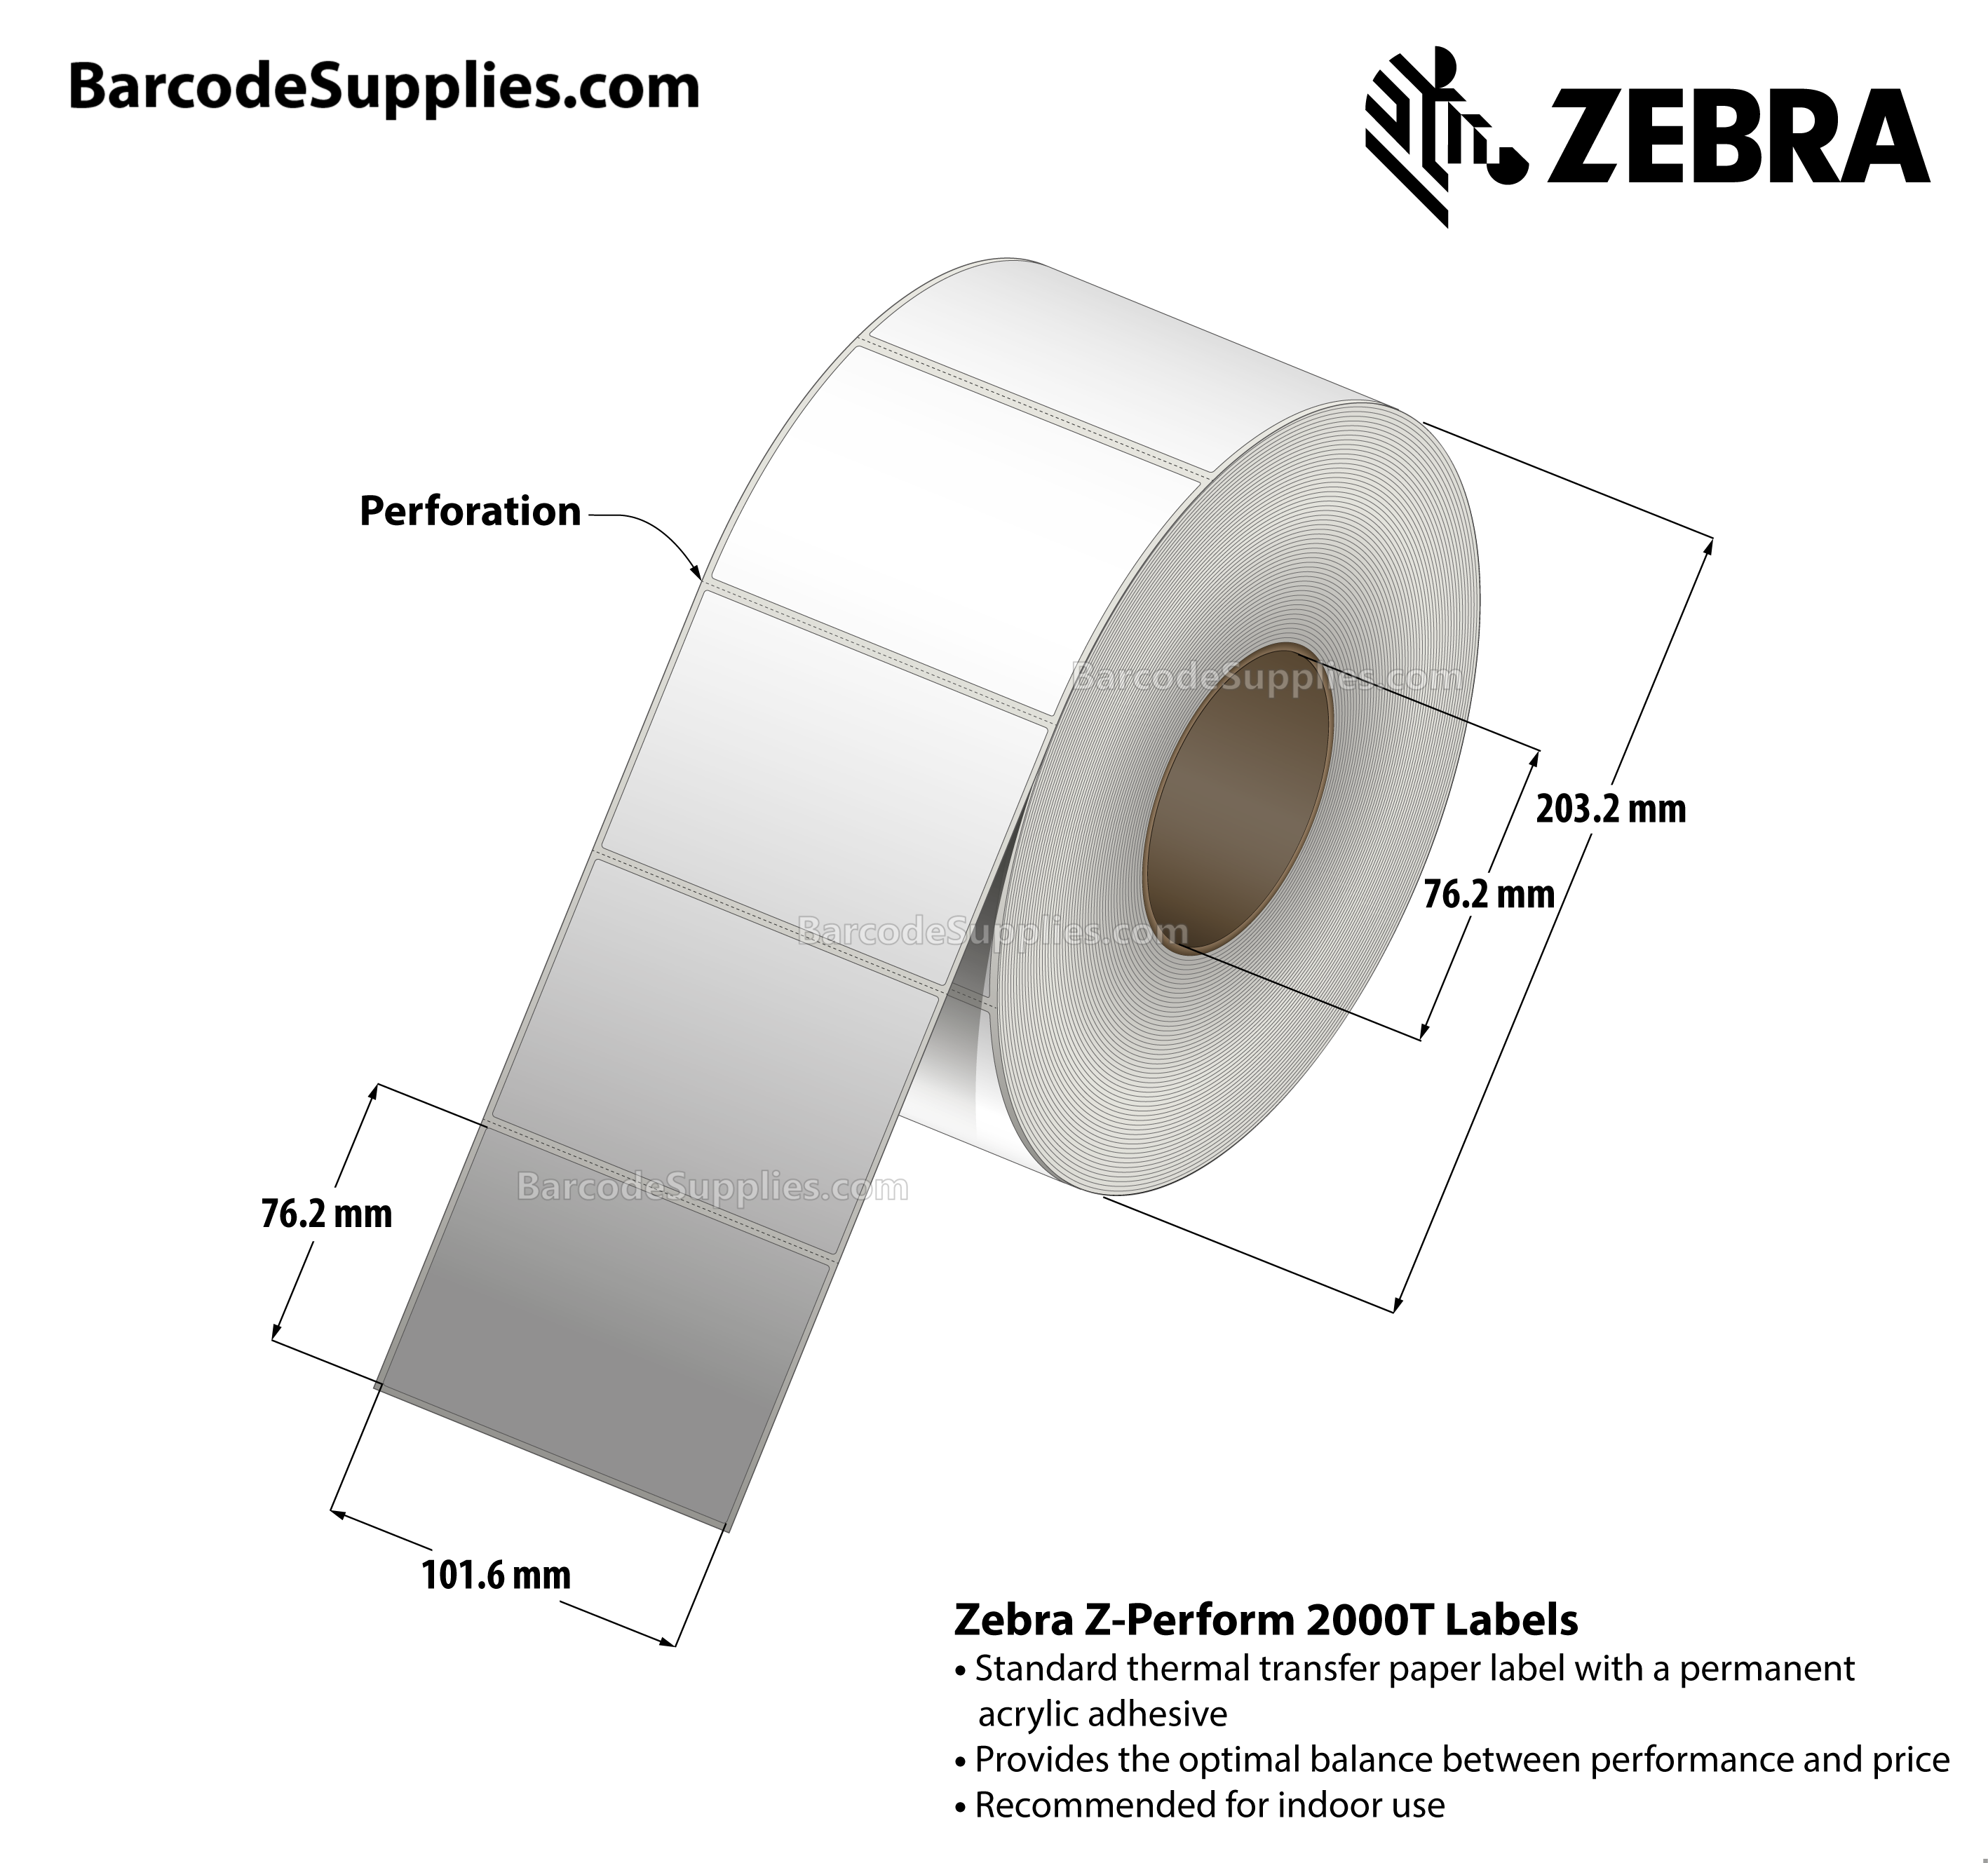 4 x 3 Thermal Transfer White Z-Perform 2000T Labels With Permanent Adhesive - Perforated - 2000 Labels Per Roll - Carton Of 4 Rolls - 8000 Labels Total - MPN: 10000284